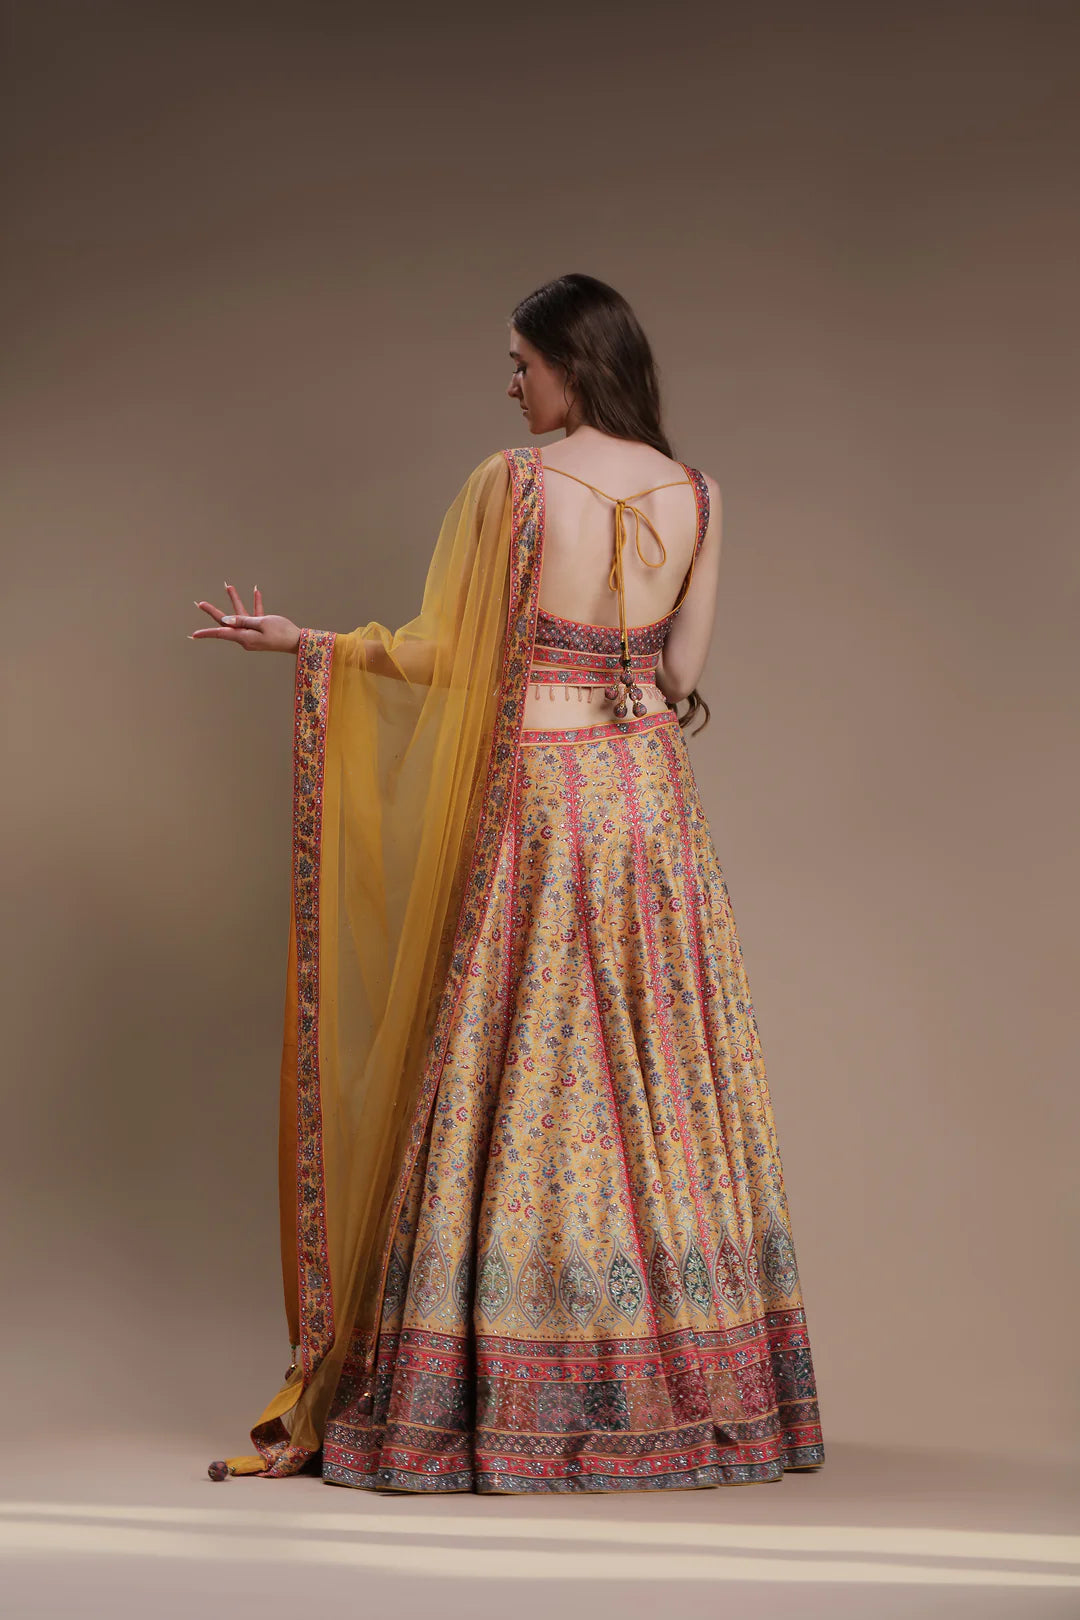 The model showcases a stylish floral lehenga with style.